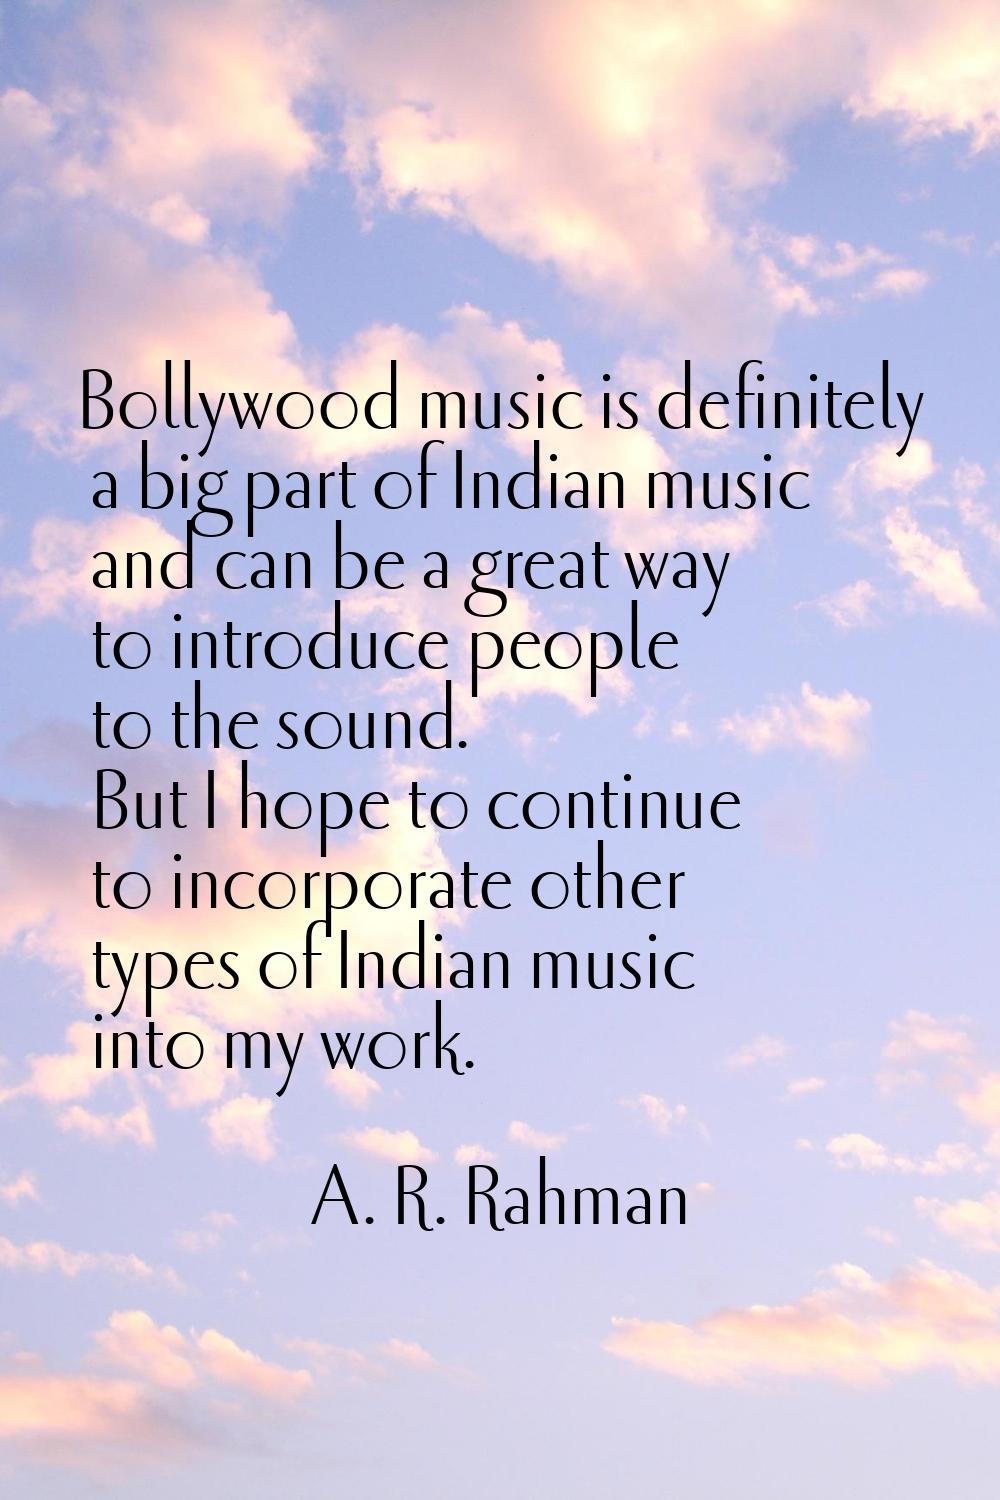 Bollywood music is definitely a big part of Indian music and can be a great way to introduce people